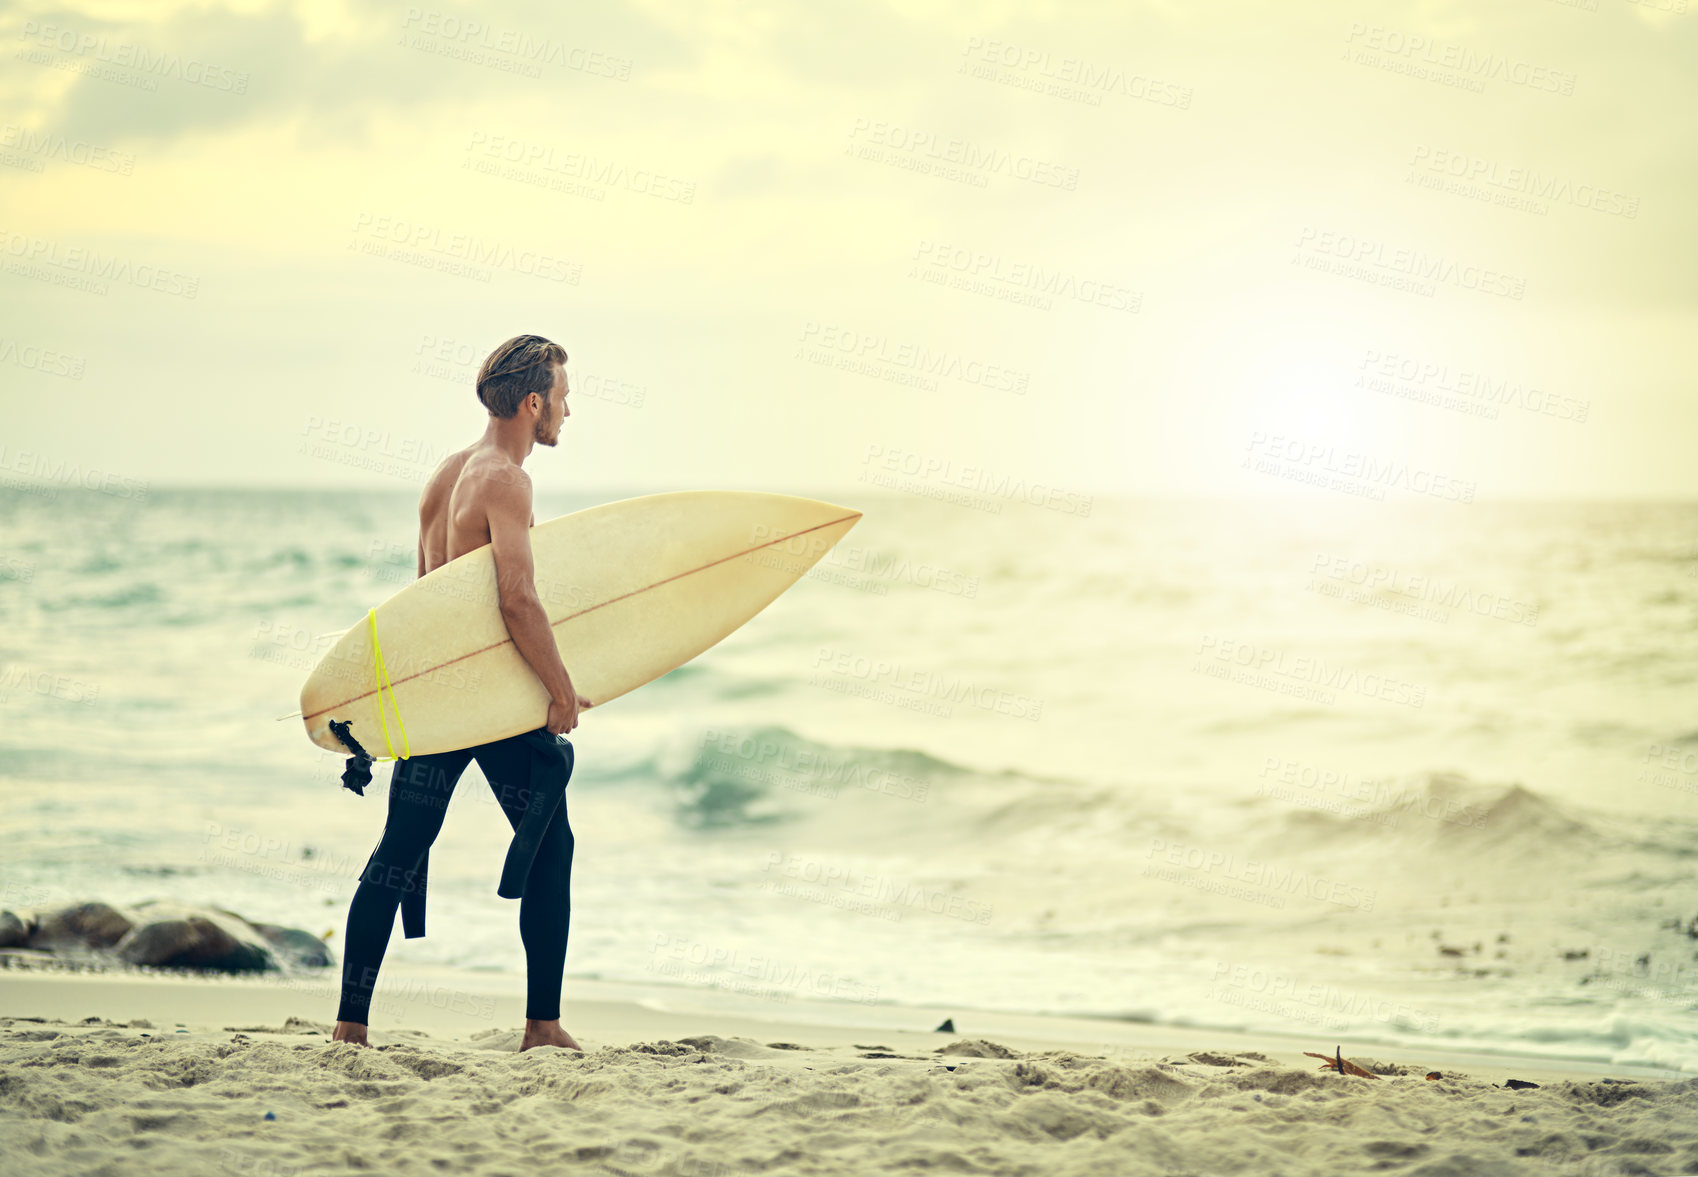 Buy stock photo Shot of a shirtless young surfer walking into the ocean with his surfboard under his arm